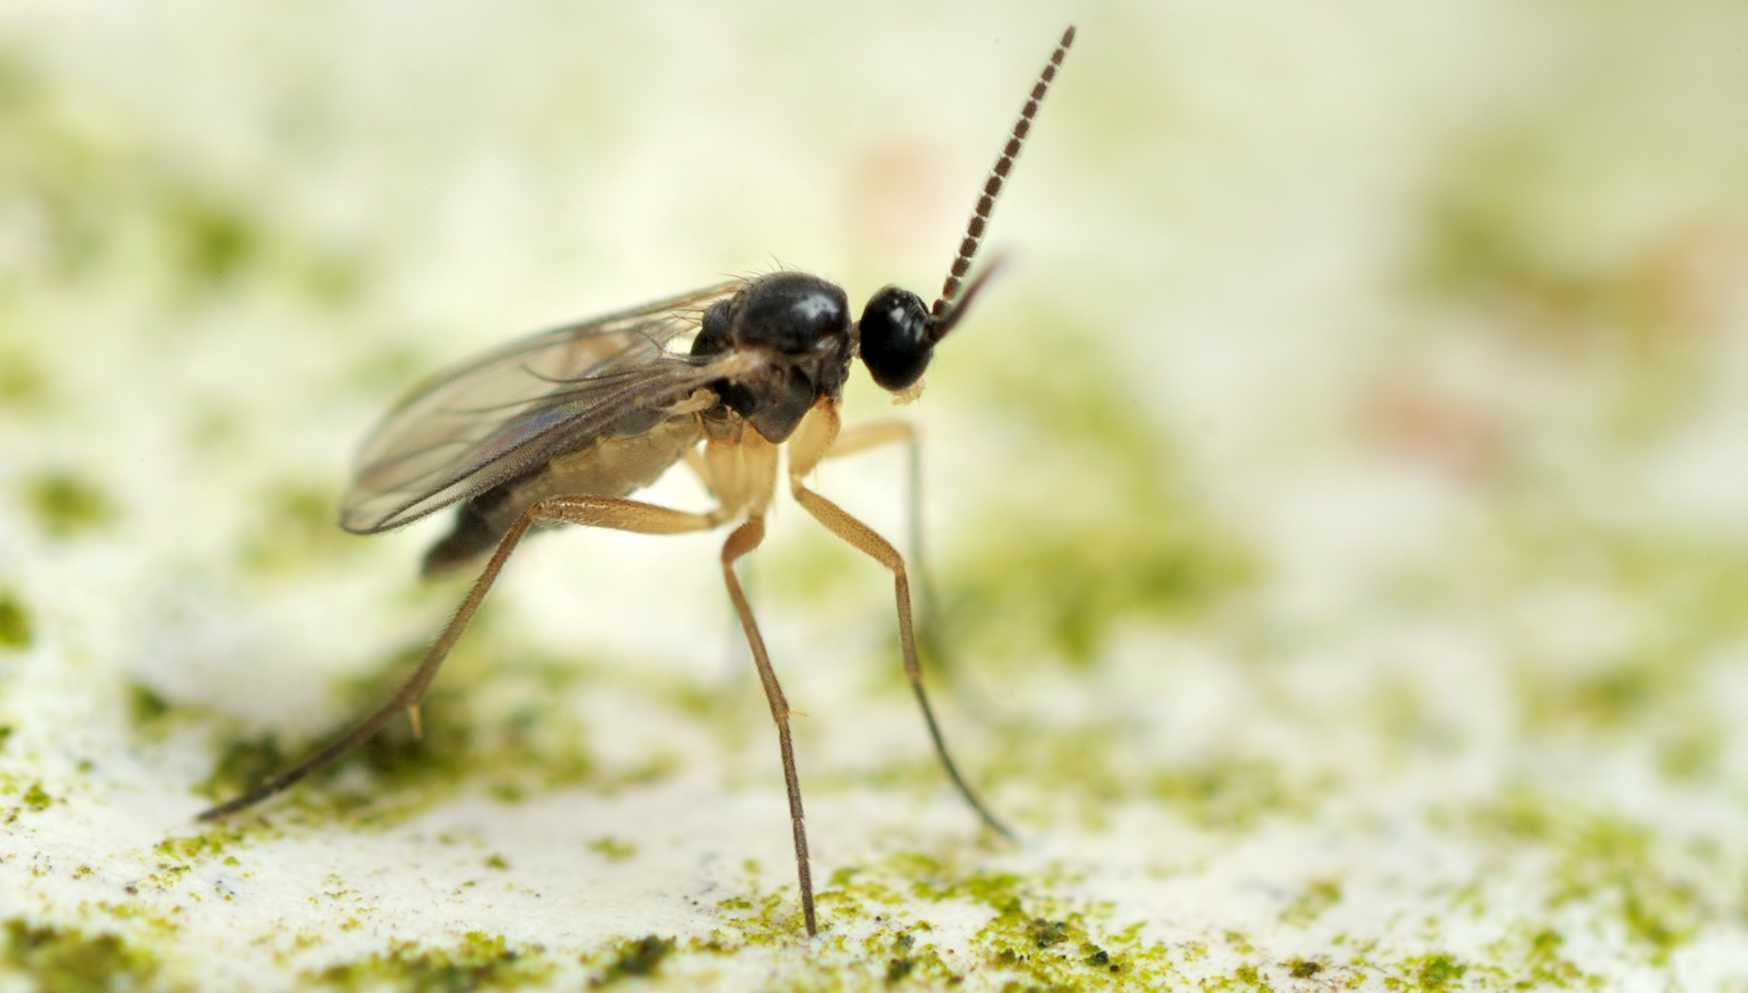 How to get rid of fungus gnats